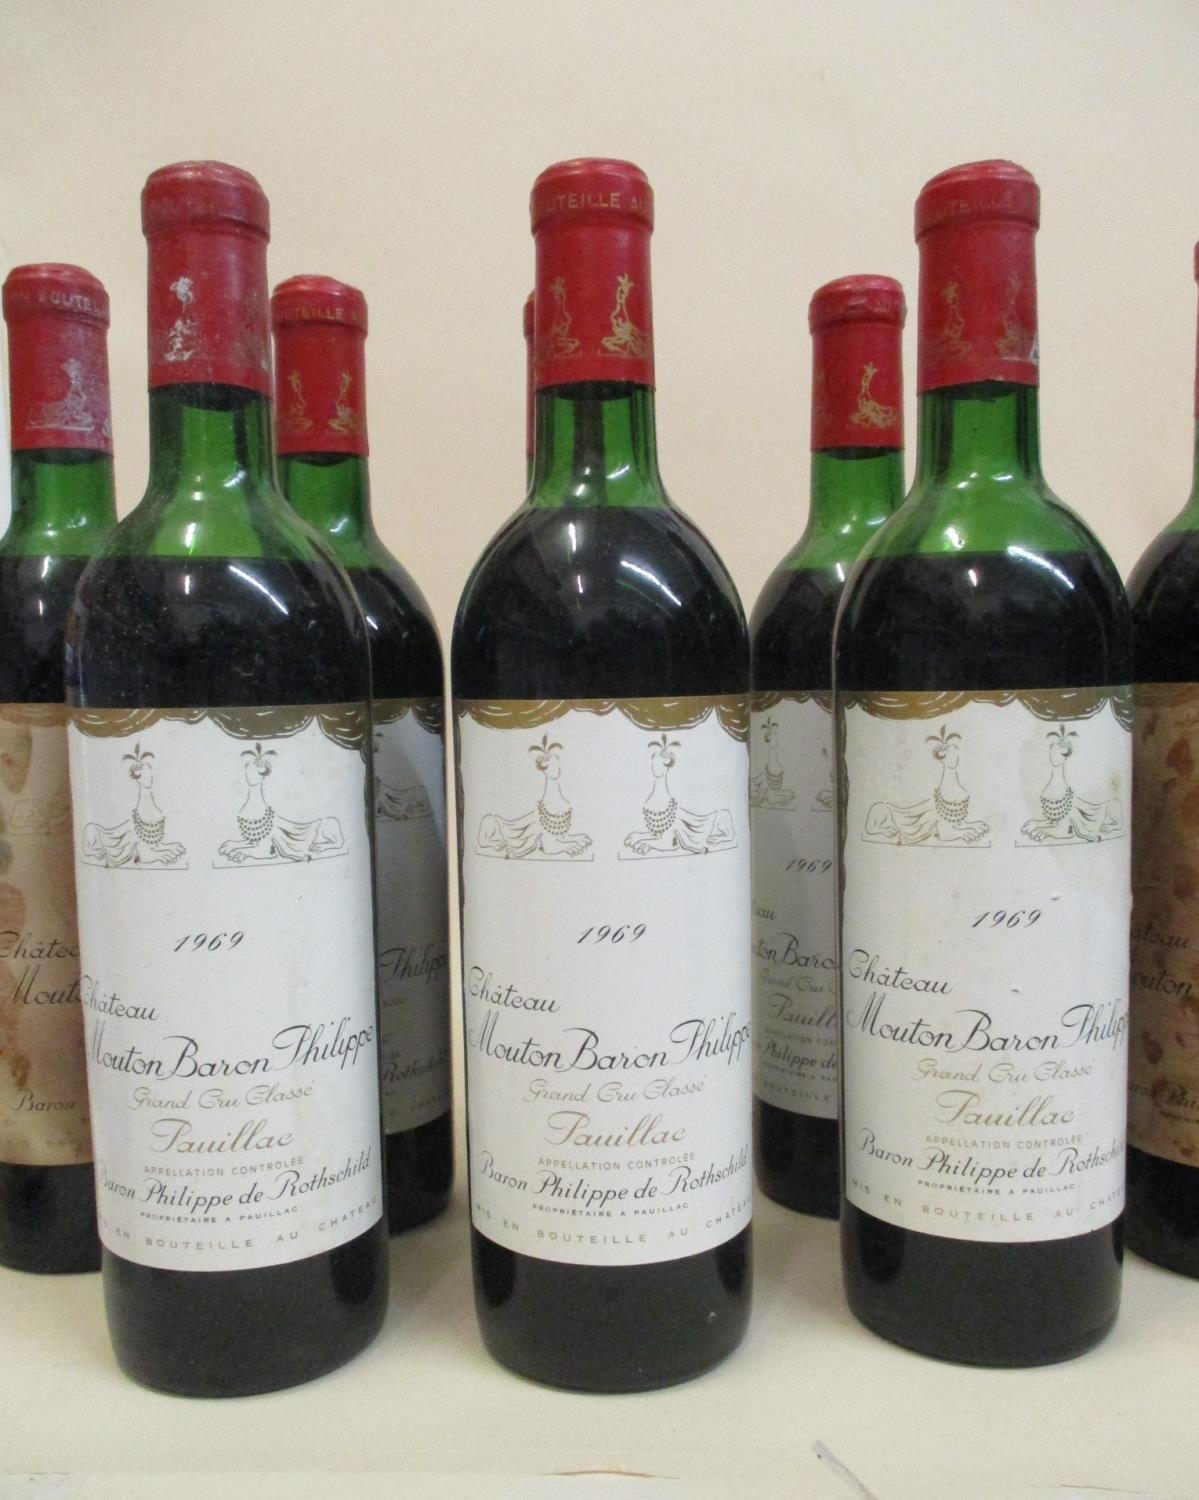 Eight bottles of Chateau Mouton Baron Philippe Grand Cru Classe Pauillac 1969 (two stained labels) - Image 2 of 2